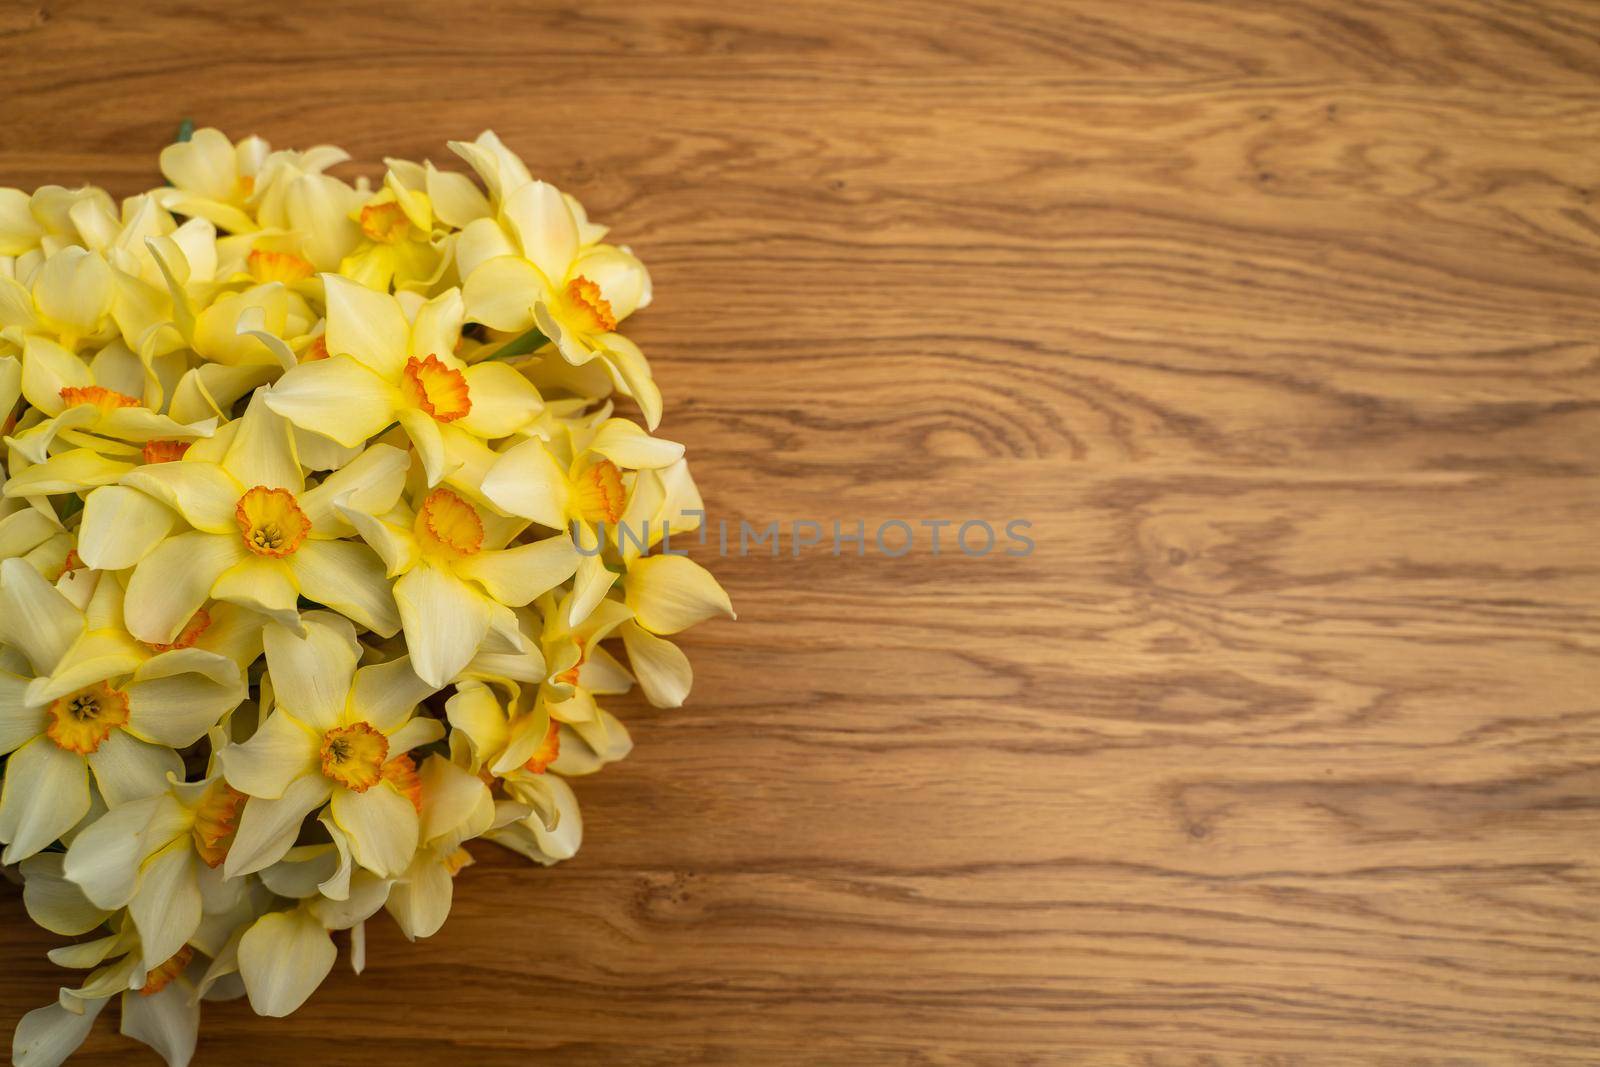 On the left is a large bouquet of yellow daffodils on an wooden background. Copy space. Can be used as a card, background for screensavers, greetings by Matiunina